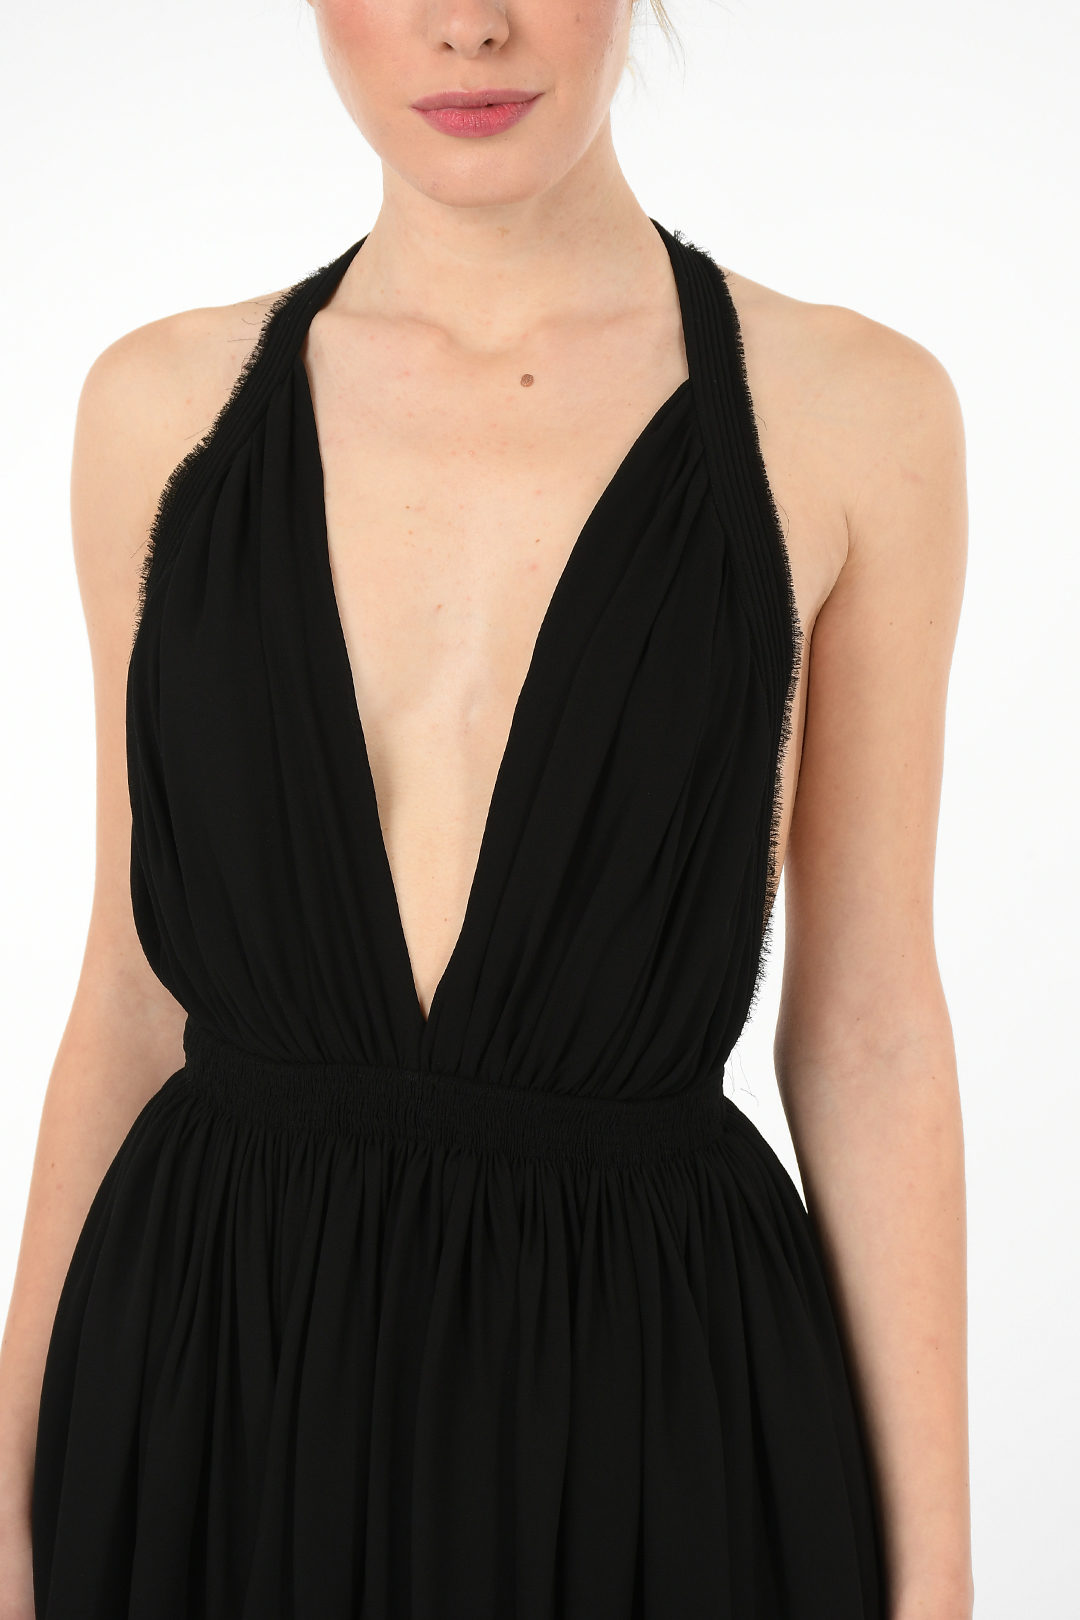 Lili - Black Sequin Plunge Neck Dress | Afterpay | Zip Pay | Sezzle – A&N  Luxe Label